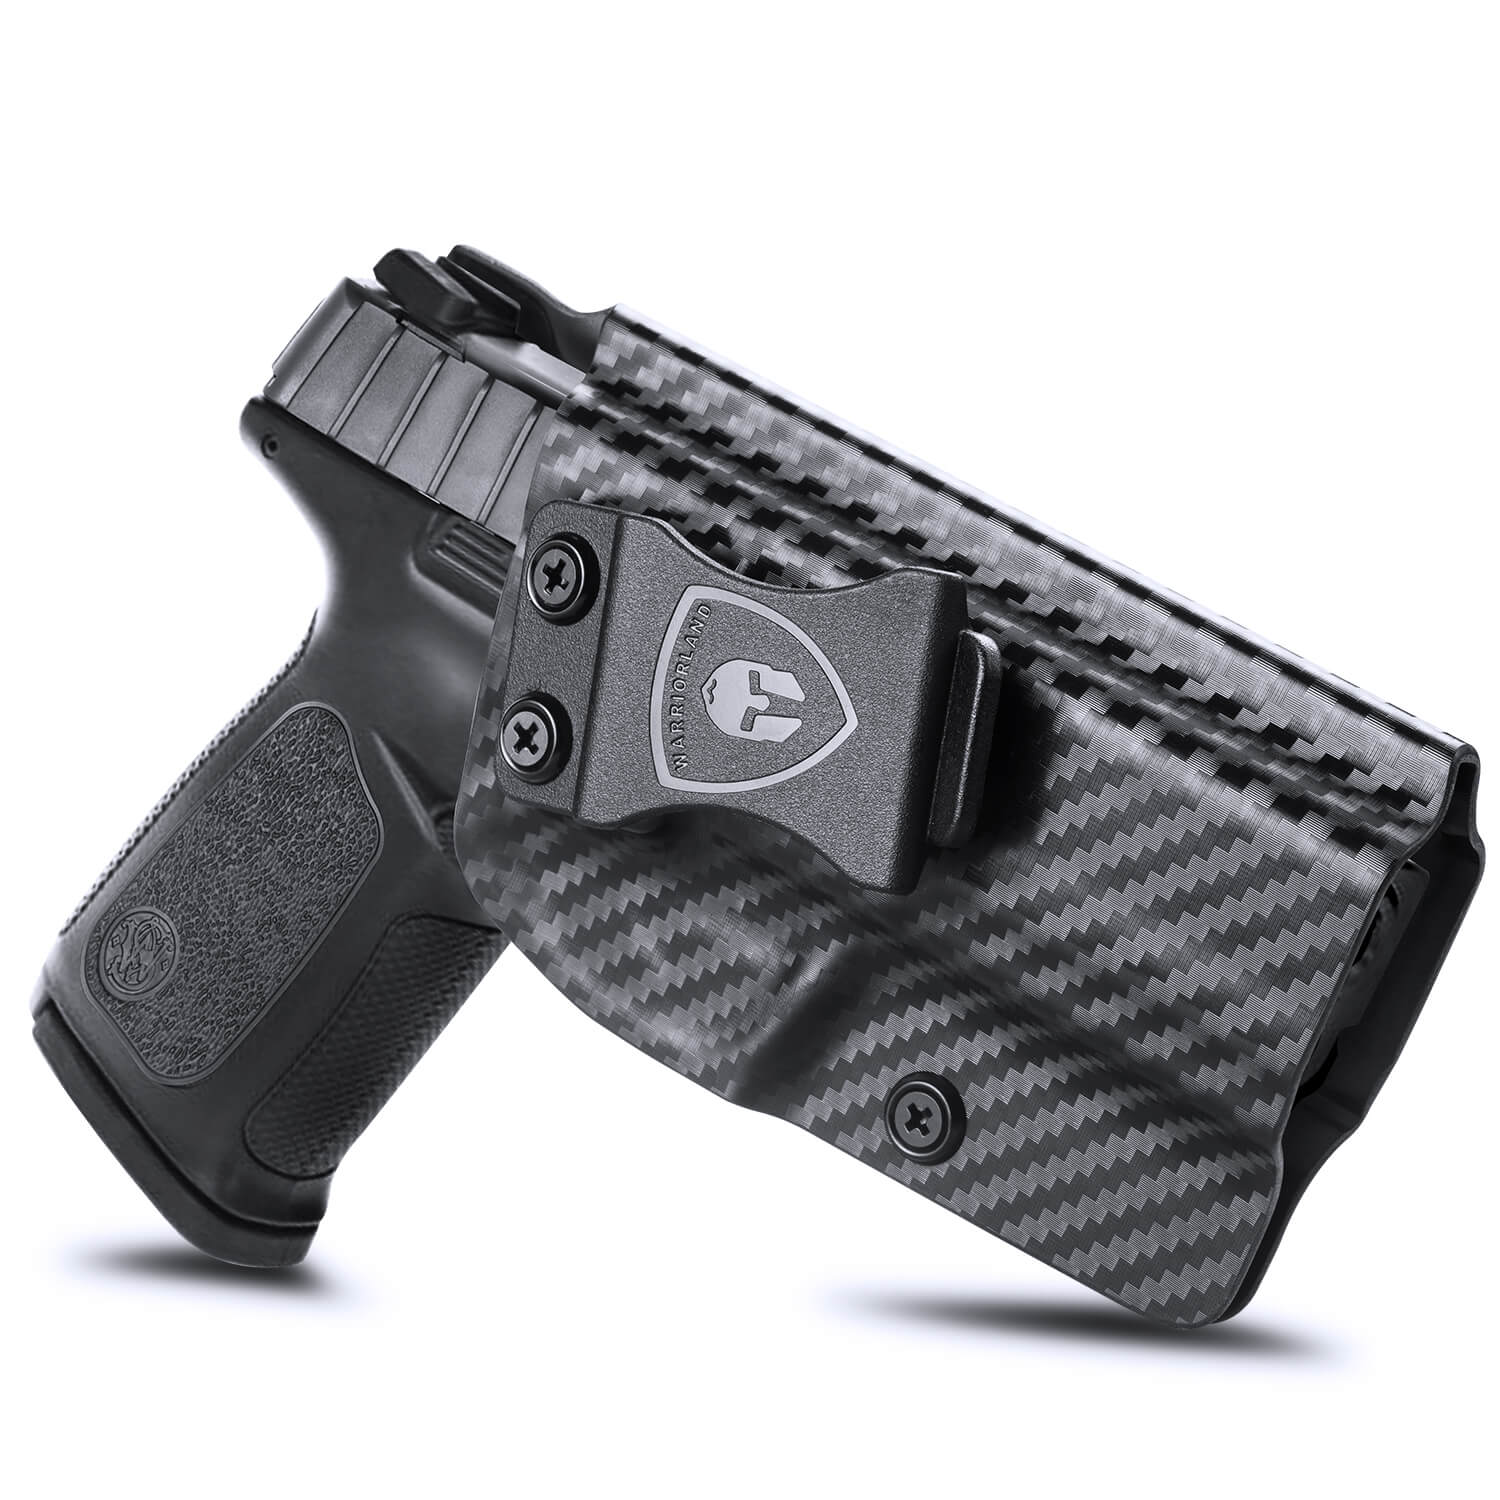 Kydex IWB Holster for Smith & Wesson SD9 SD40 VE Carbon fiber